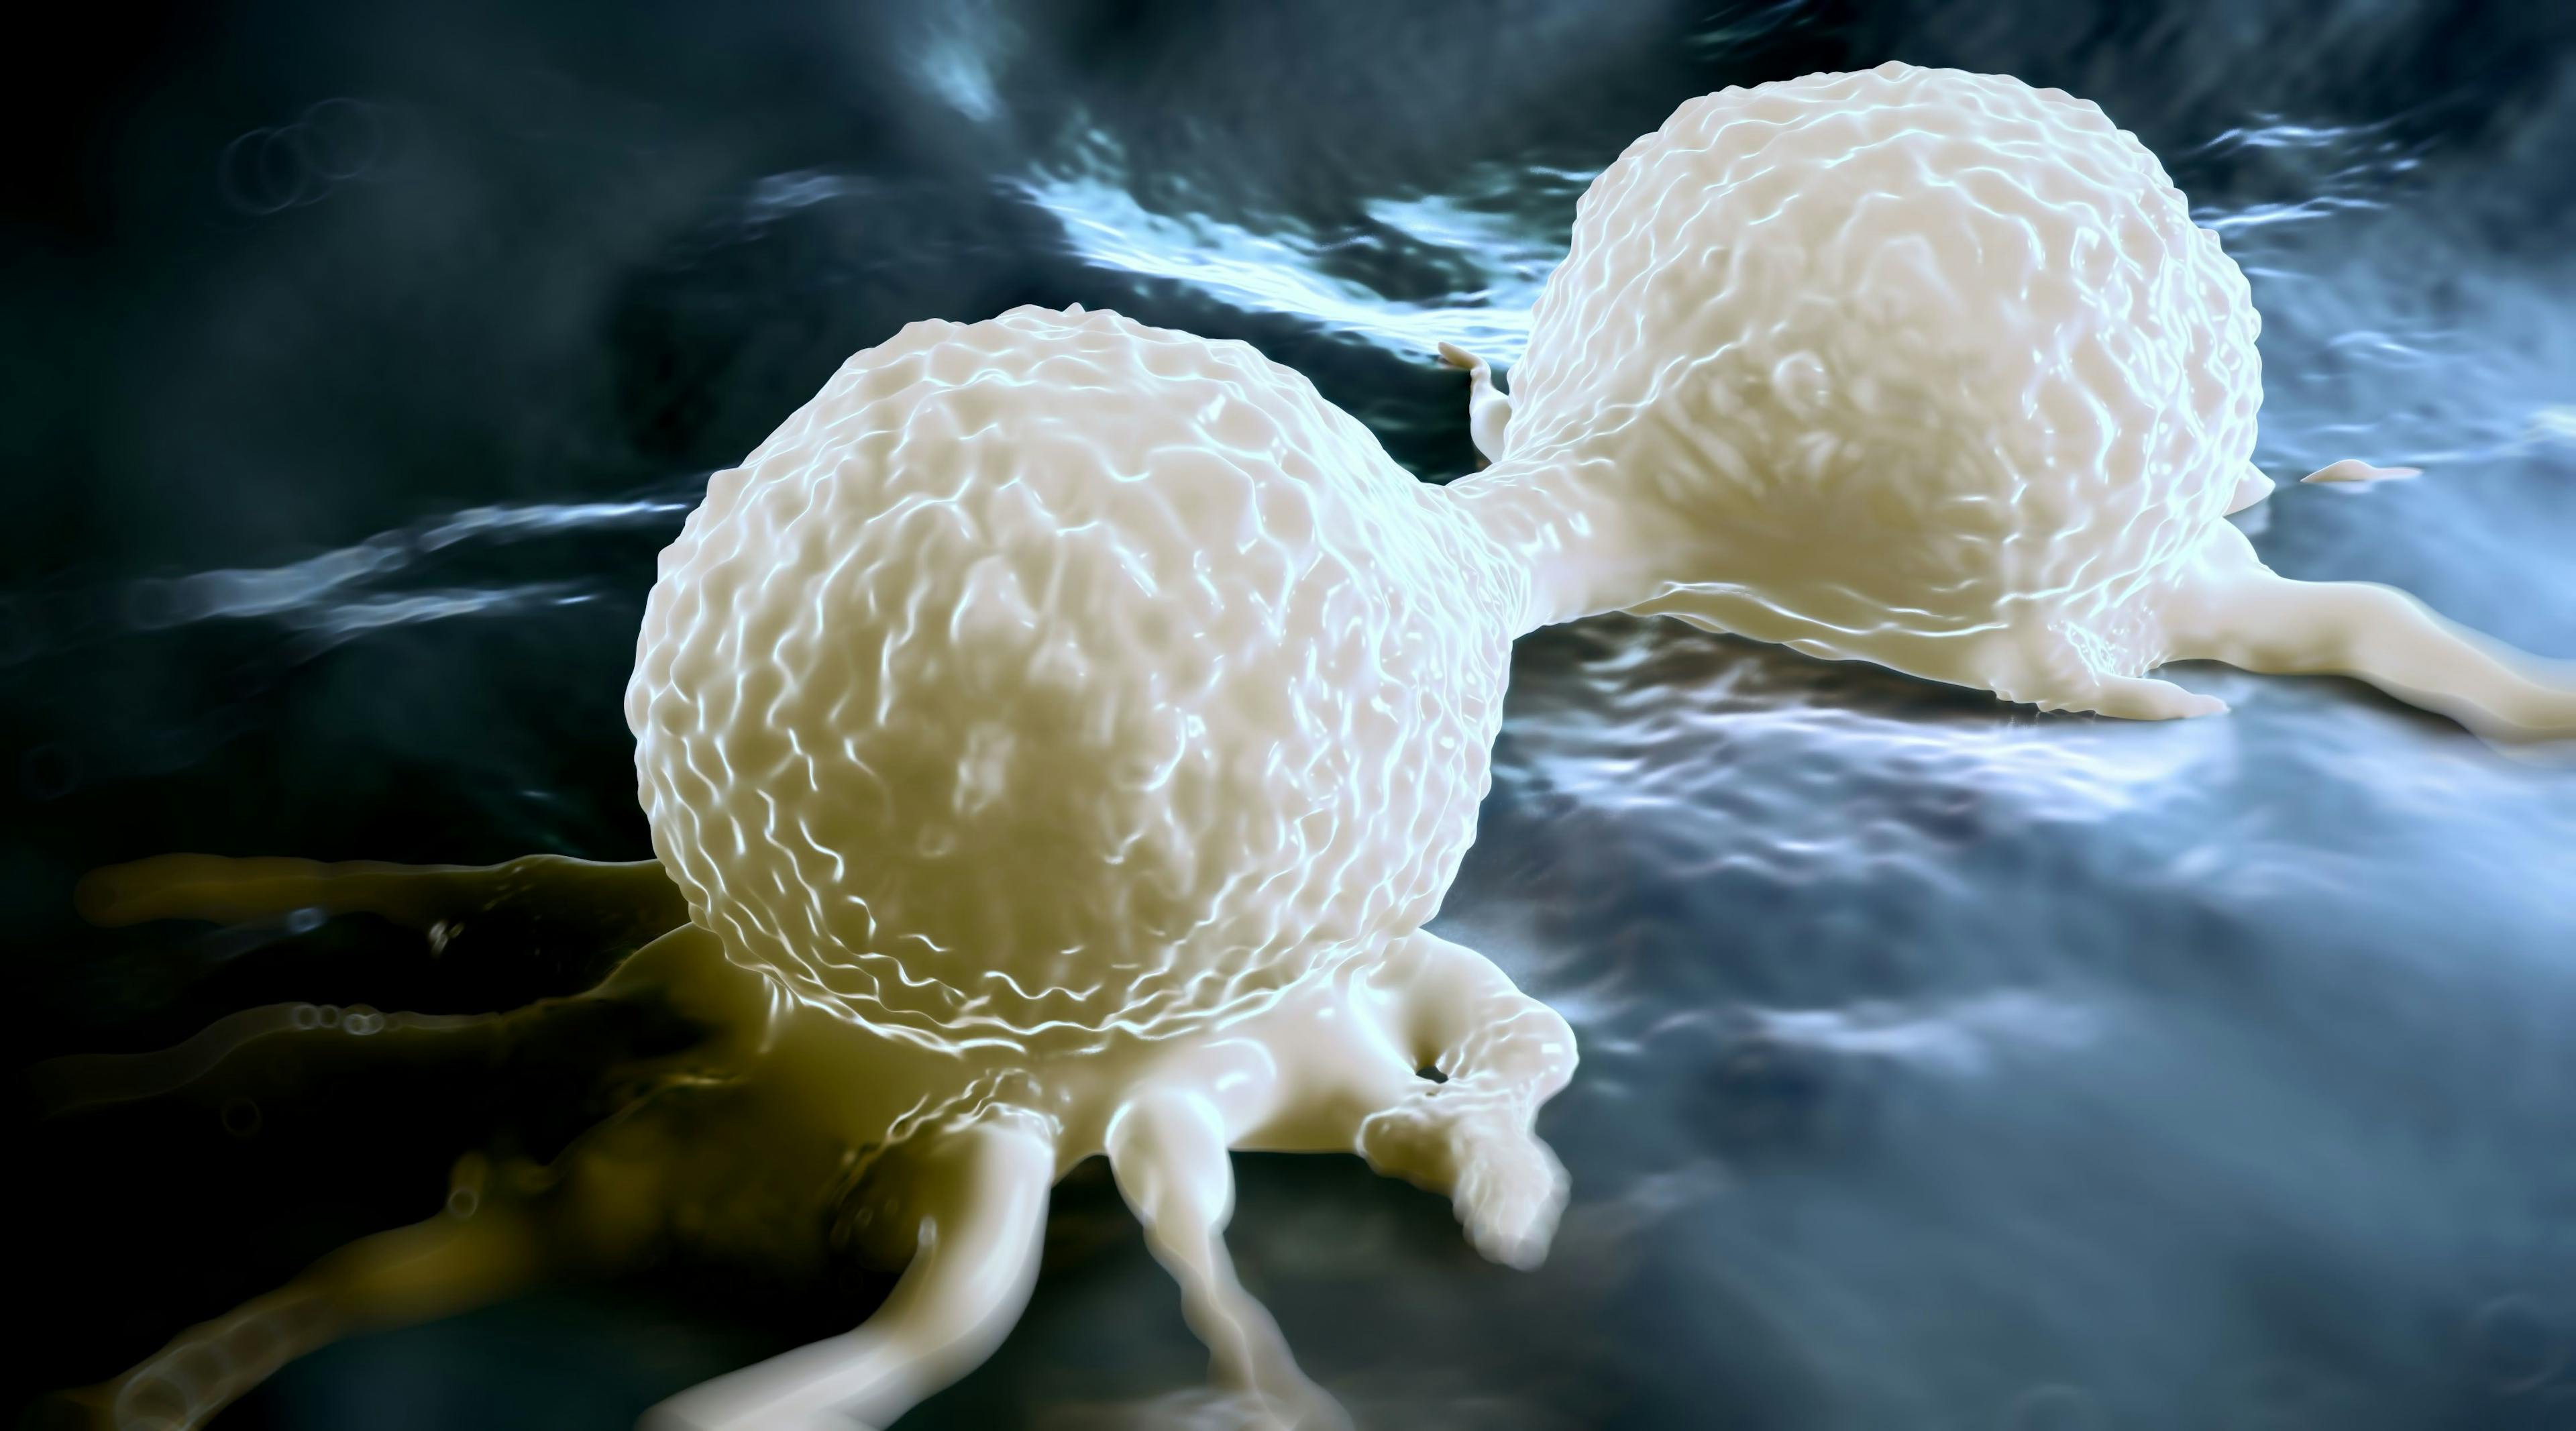 Avelumab in Epithelial Ovarian Cancer Fails to Meet Primary Endpoint